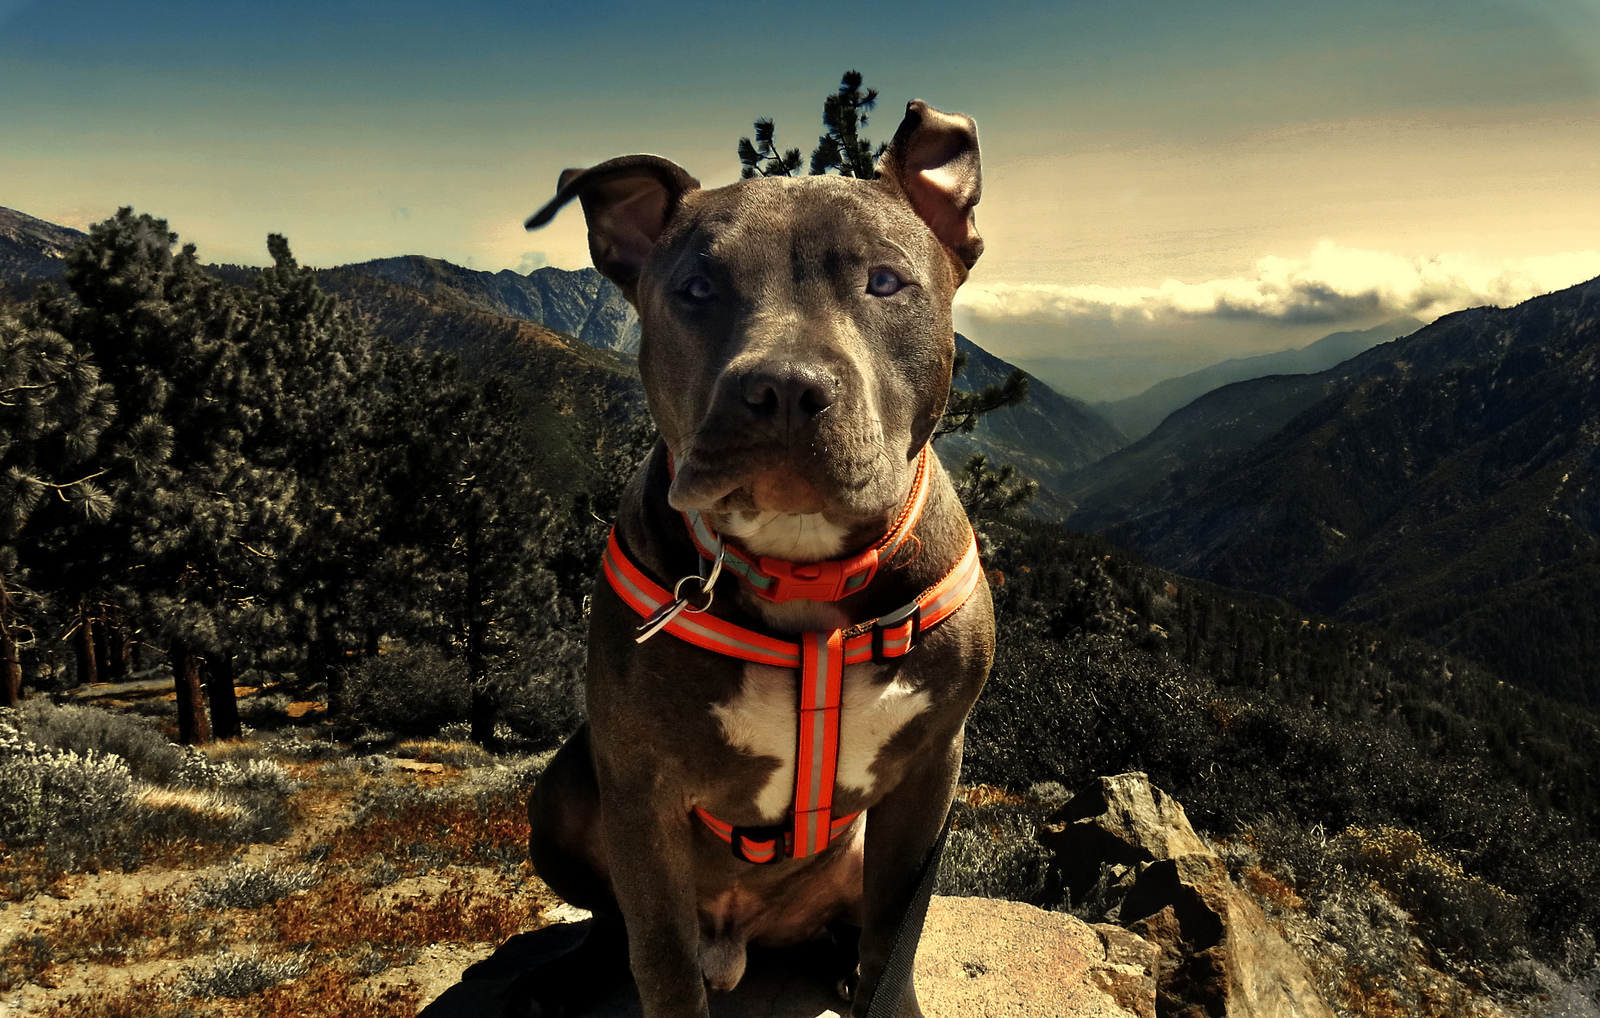 How to Have a Fun, Safe Day-Hike With Dogs